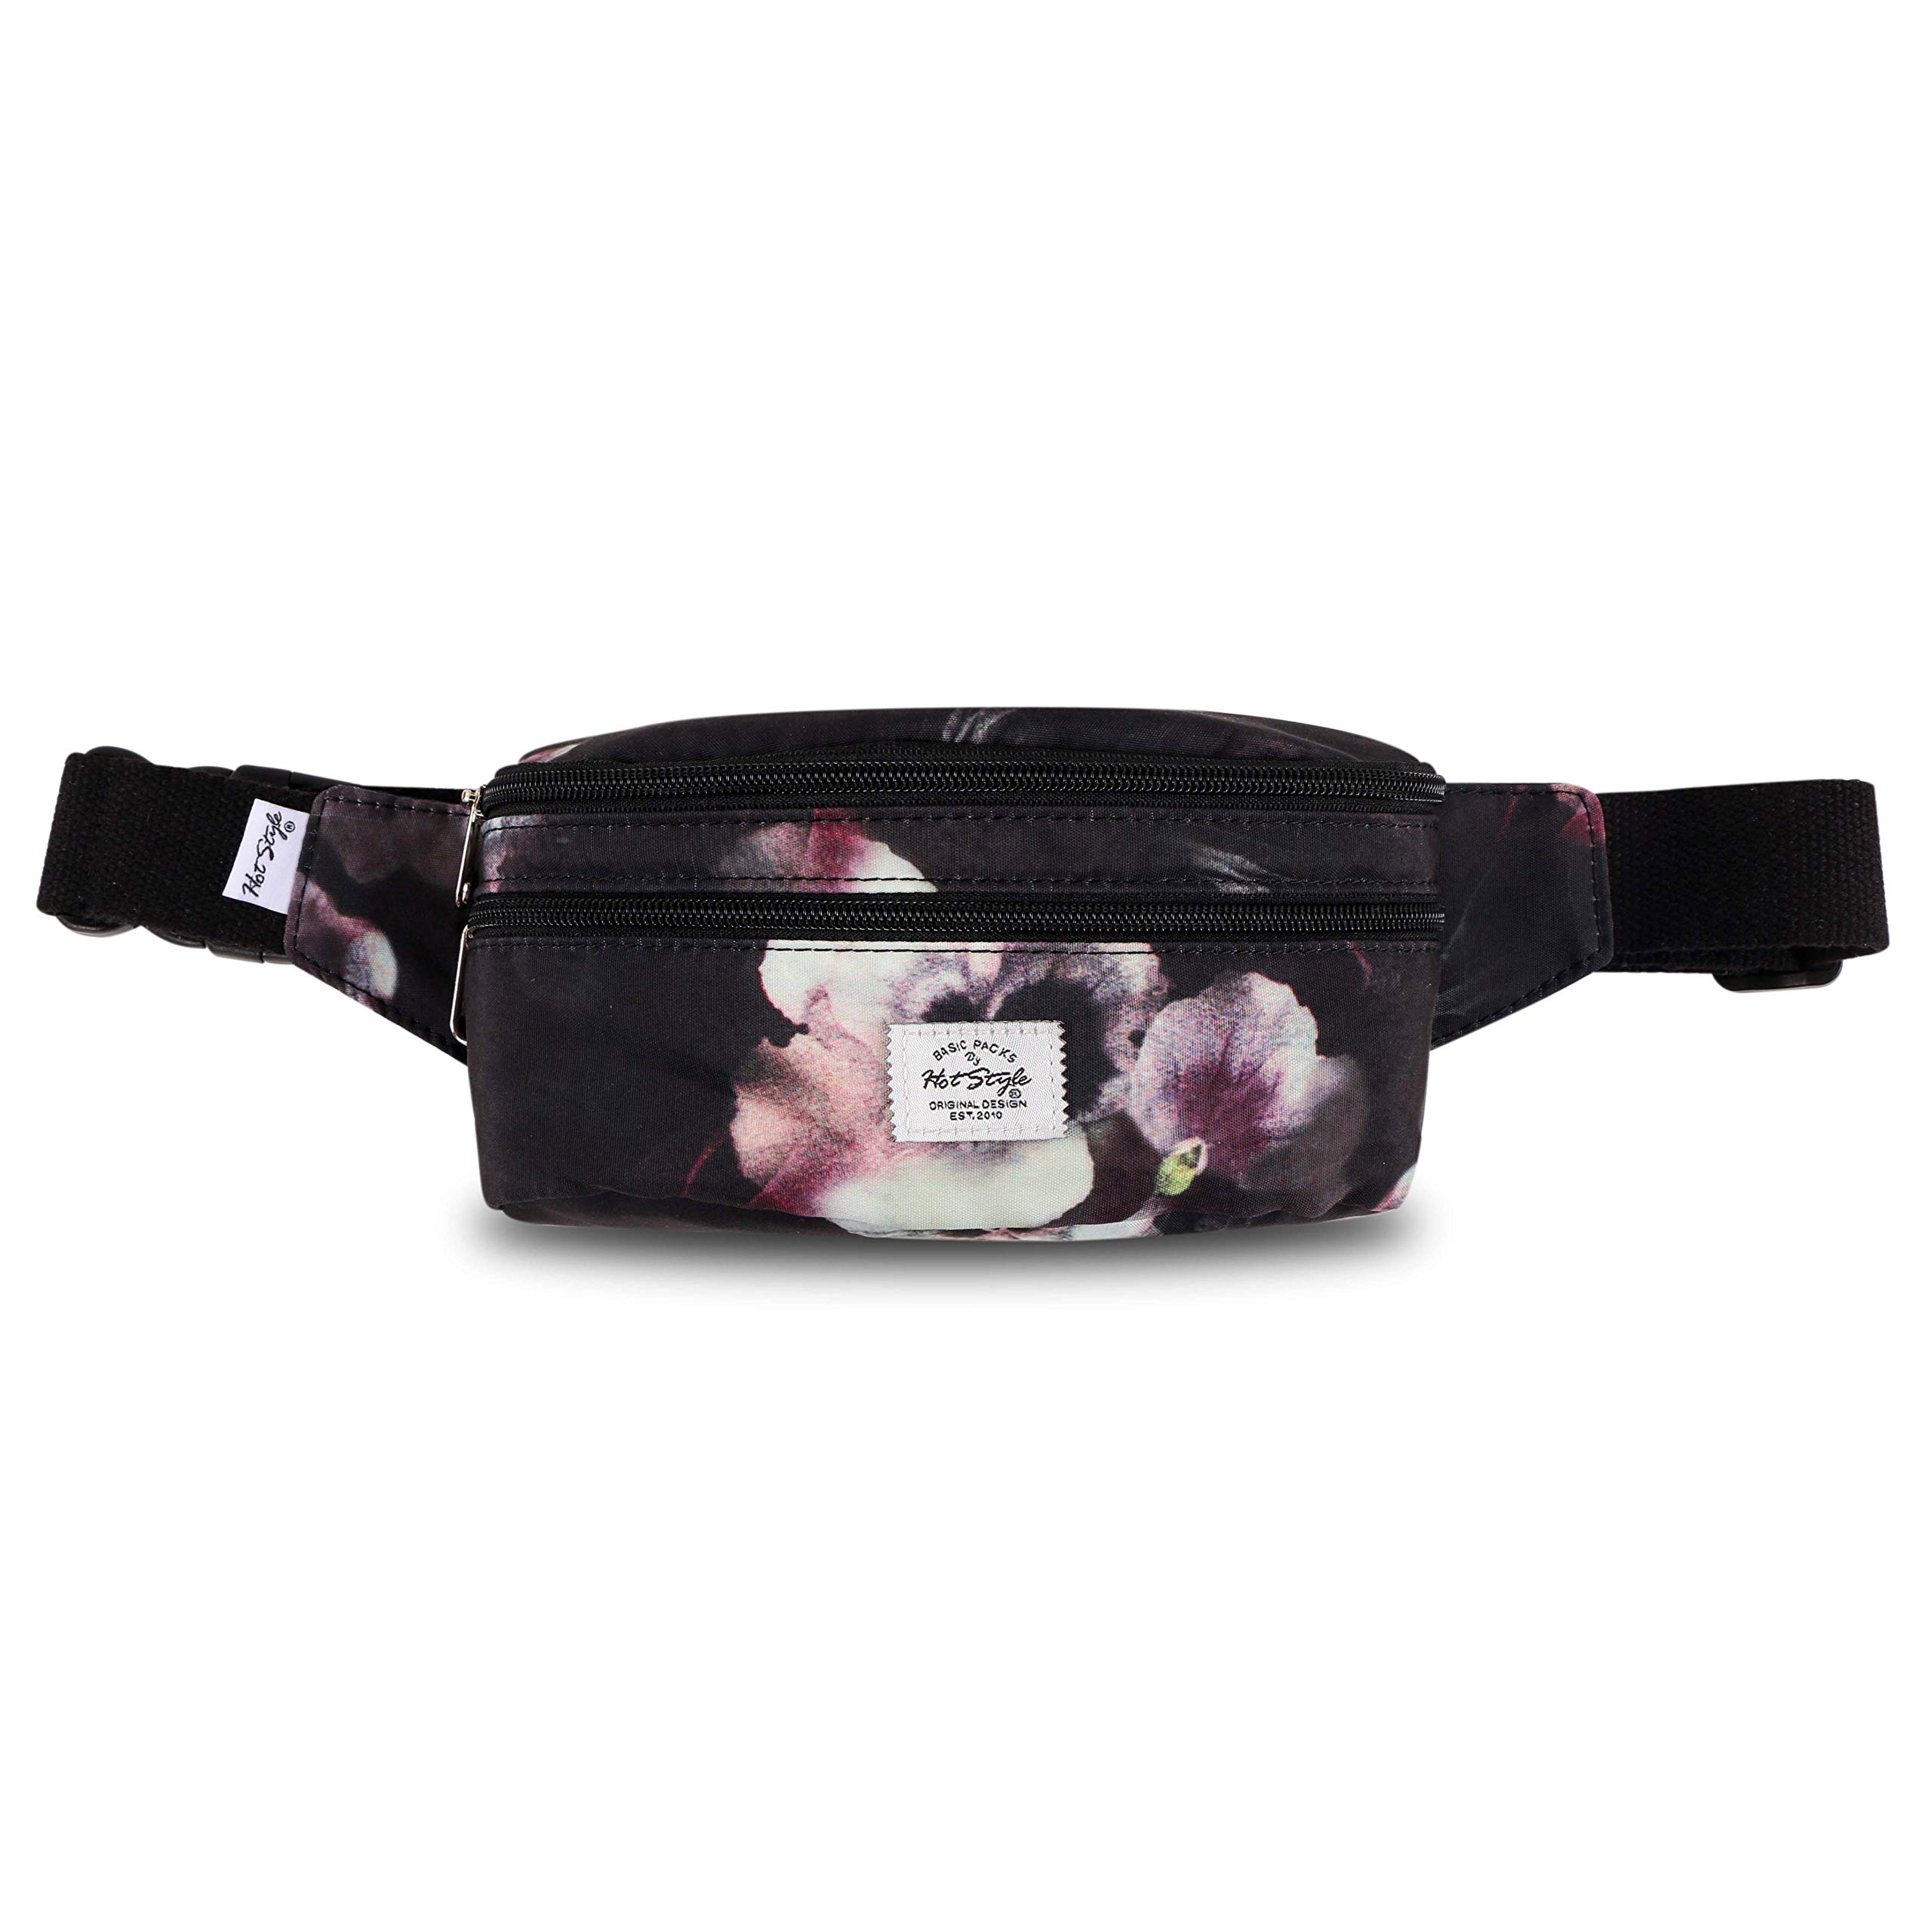 HotStyle 521s Small Fanny Pack Waist Bag for Women, 8.0